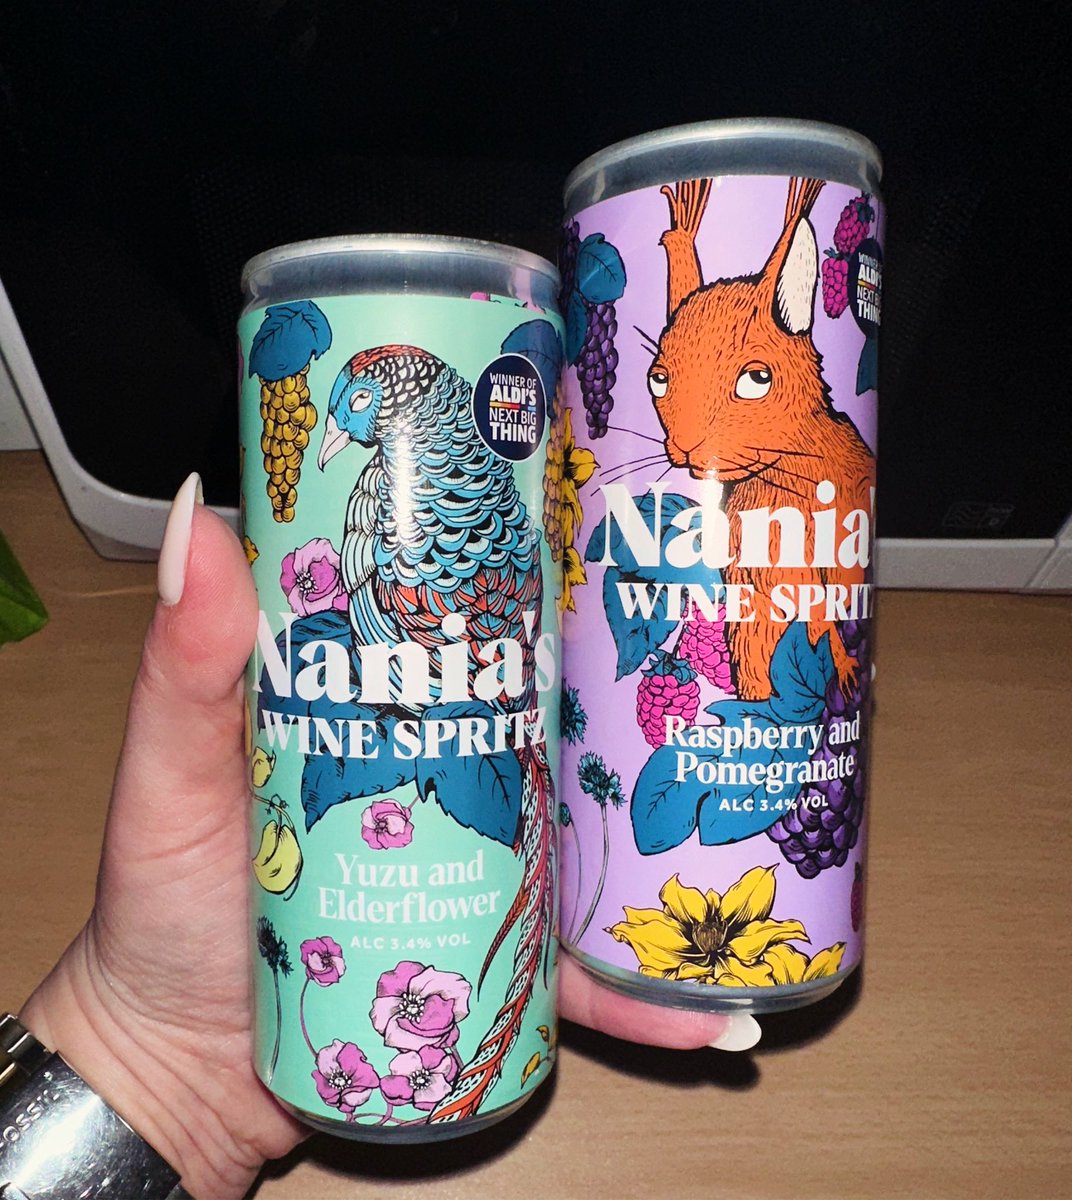 Excited to try these @NaniasVineyard #WineSpritz from @AldiUK that I saw on #AldisNextBigThing Couldn’t get them last week then randomly found them tonight 😋